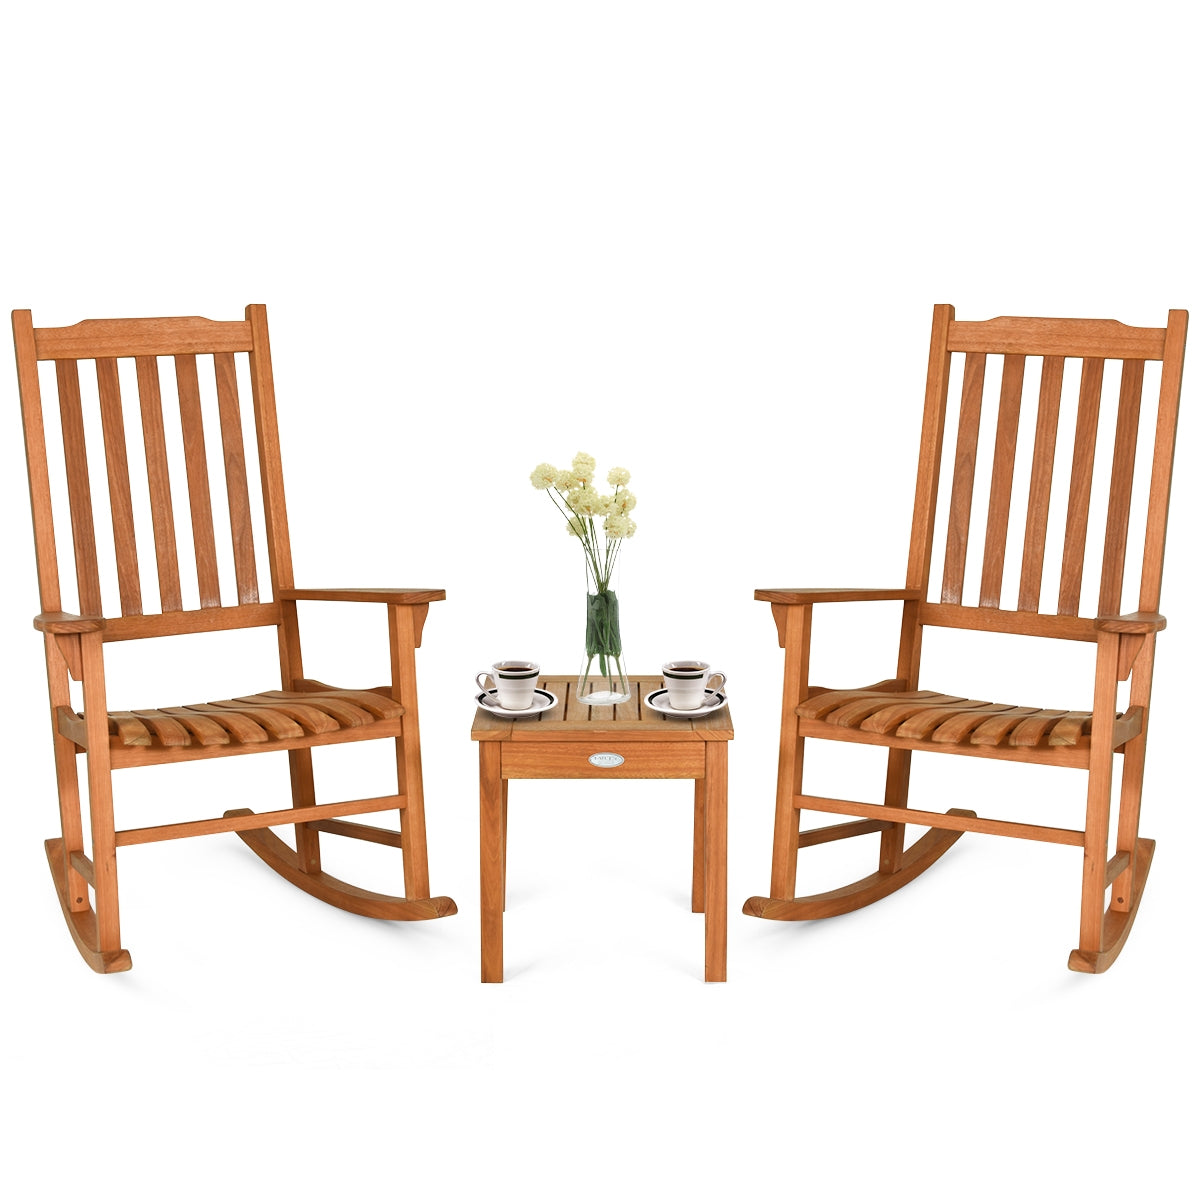 3 Pieces Eucalyptus Rocking Chair Set with Coffee Table for Outdoor Patio and Garden